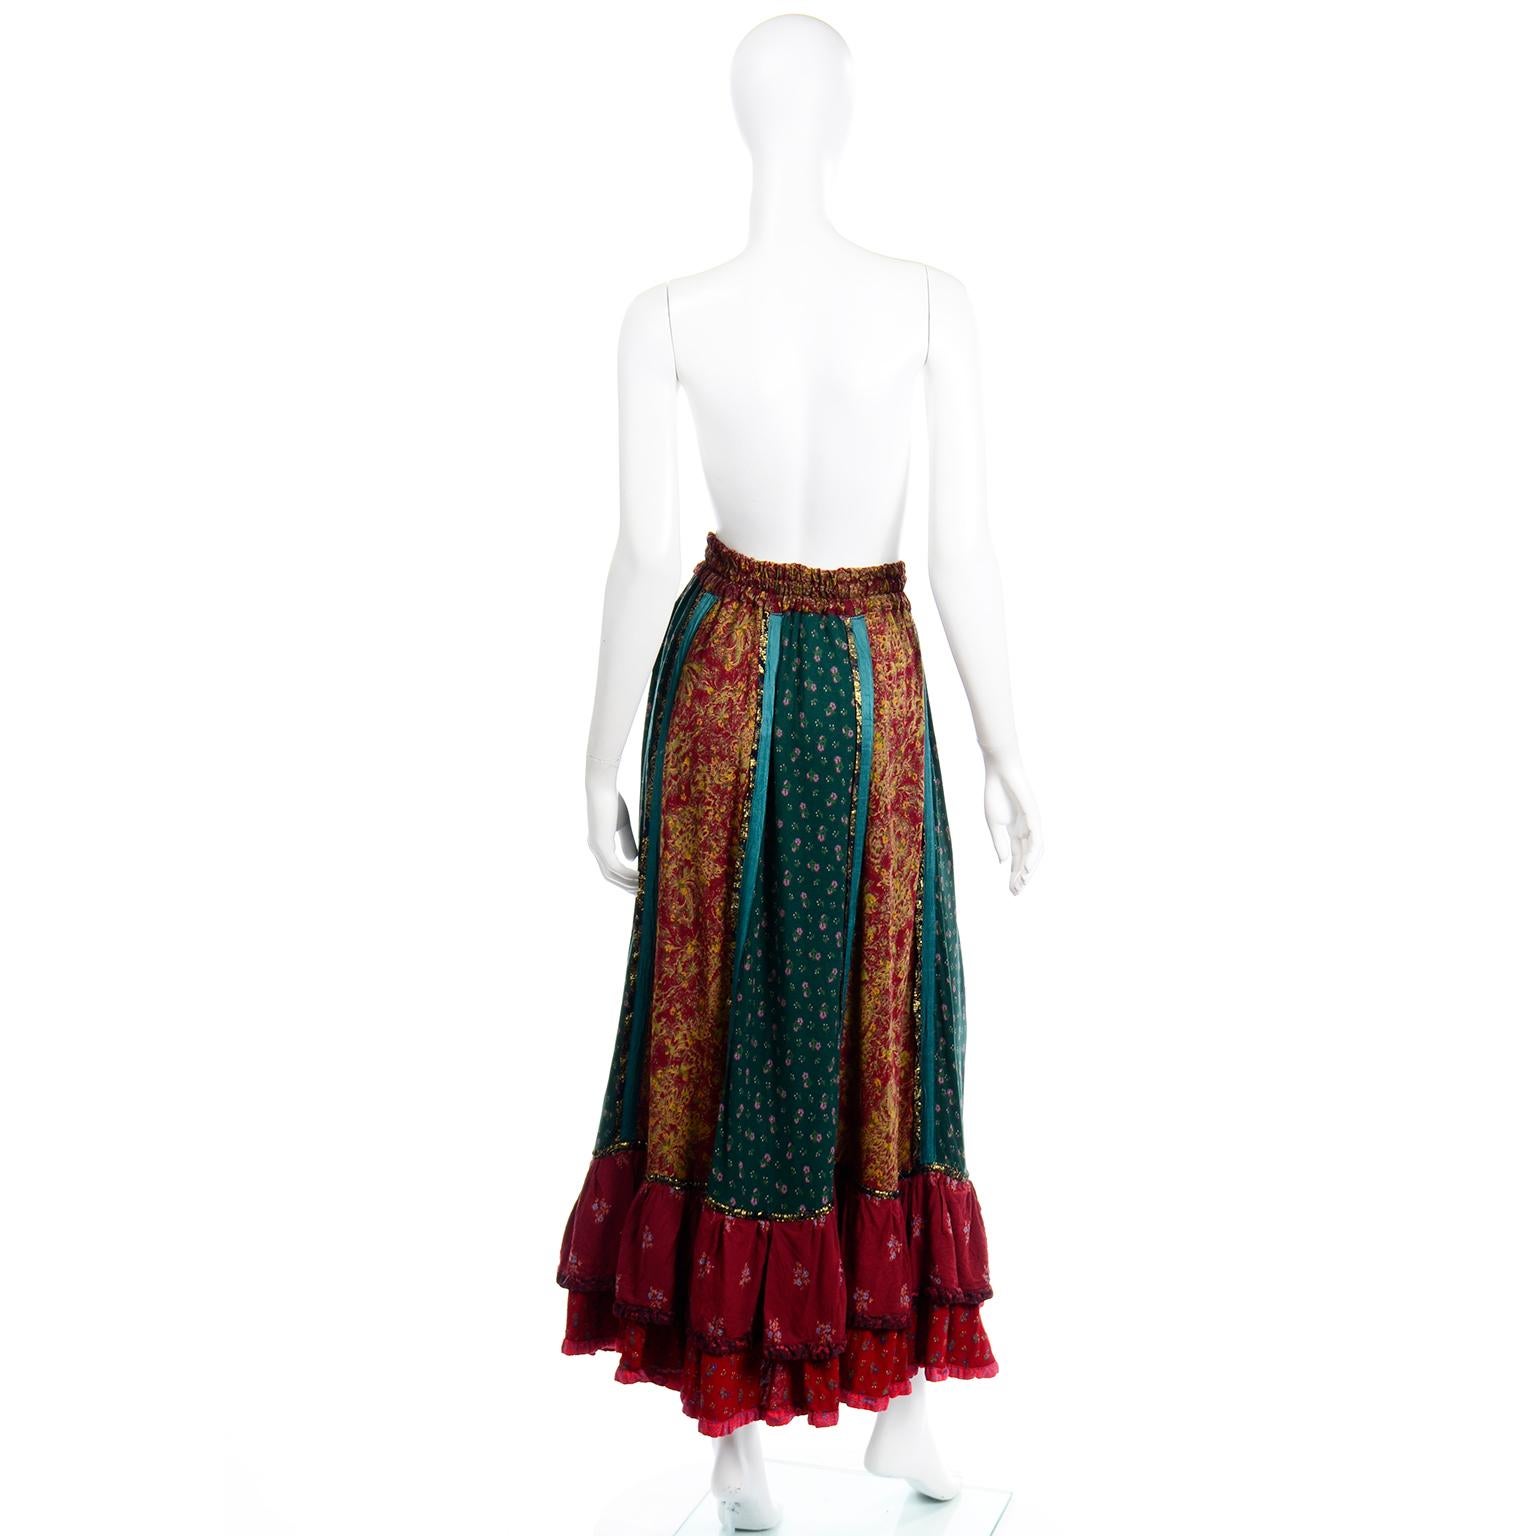 Women's Vintage Russian Multi Fabric Colorful Skirt or Strapless Dress